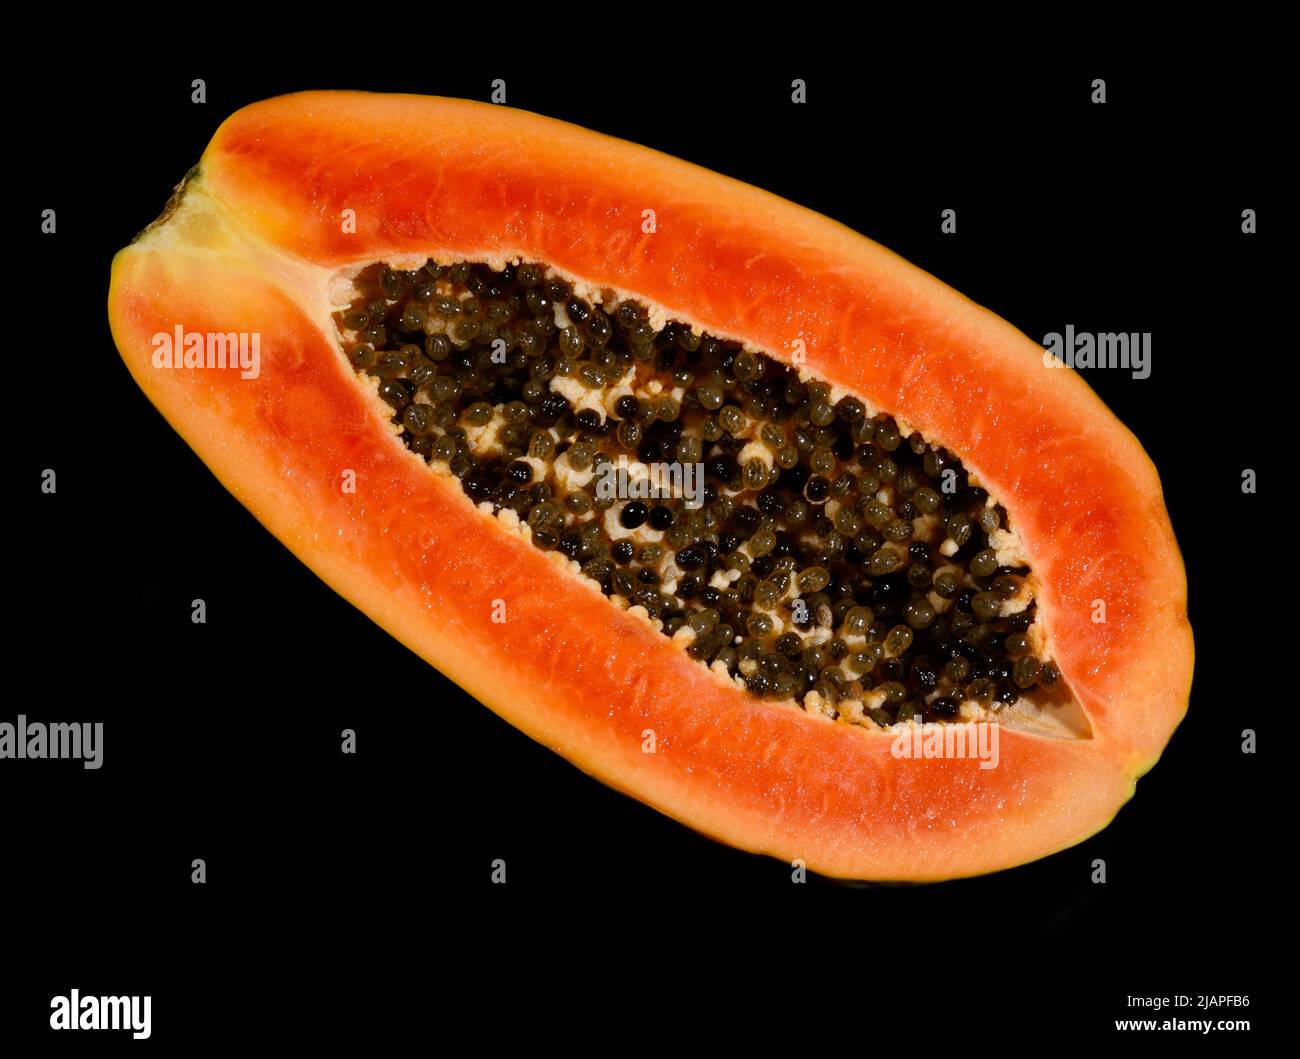 Freshly cut Papaya against black background. The papaya, papaw, or pawpaw is the plant Carica papaya, one of the 22 accepted species in the genus Carica of the family Caricaceae. It was first domesticated in Mesoamerica, within modern-day southern Mexico and Central America. In 2020, India produced 43% of the world supply of papayas. Stock Photo